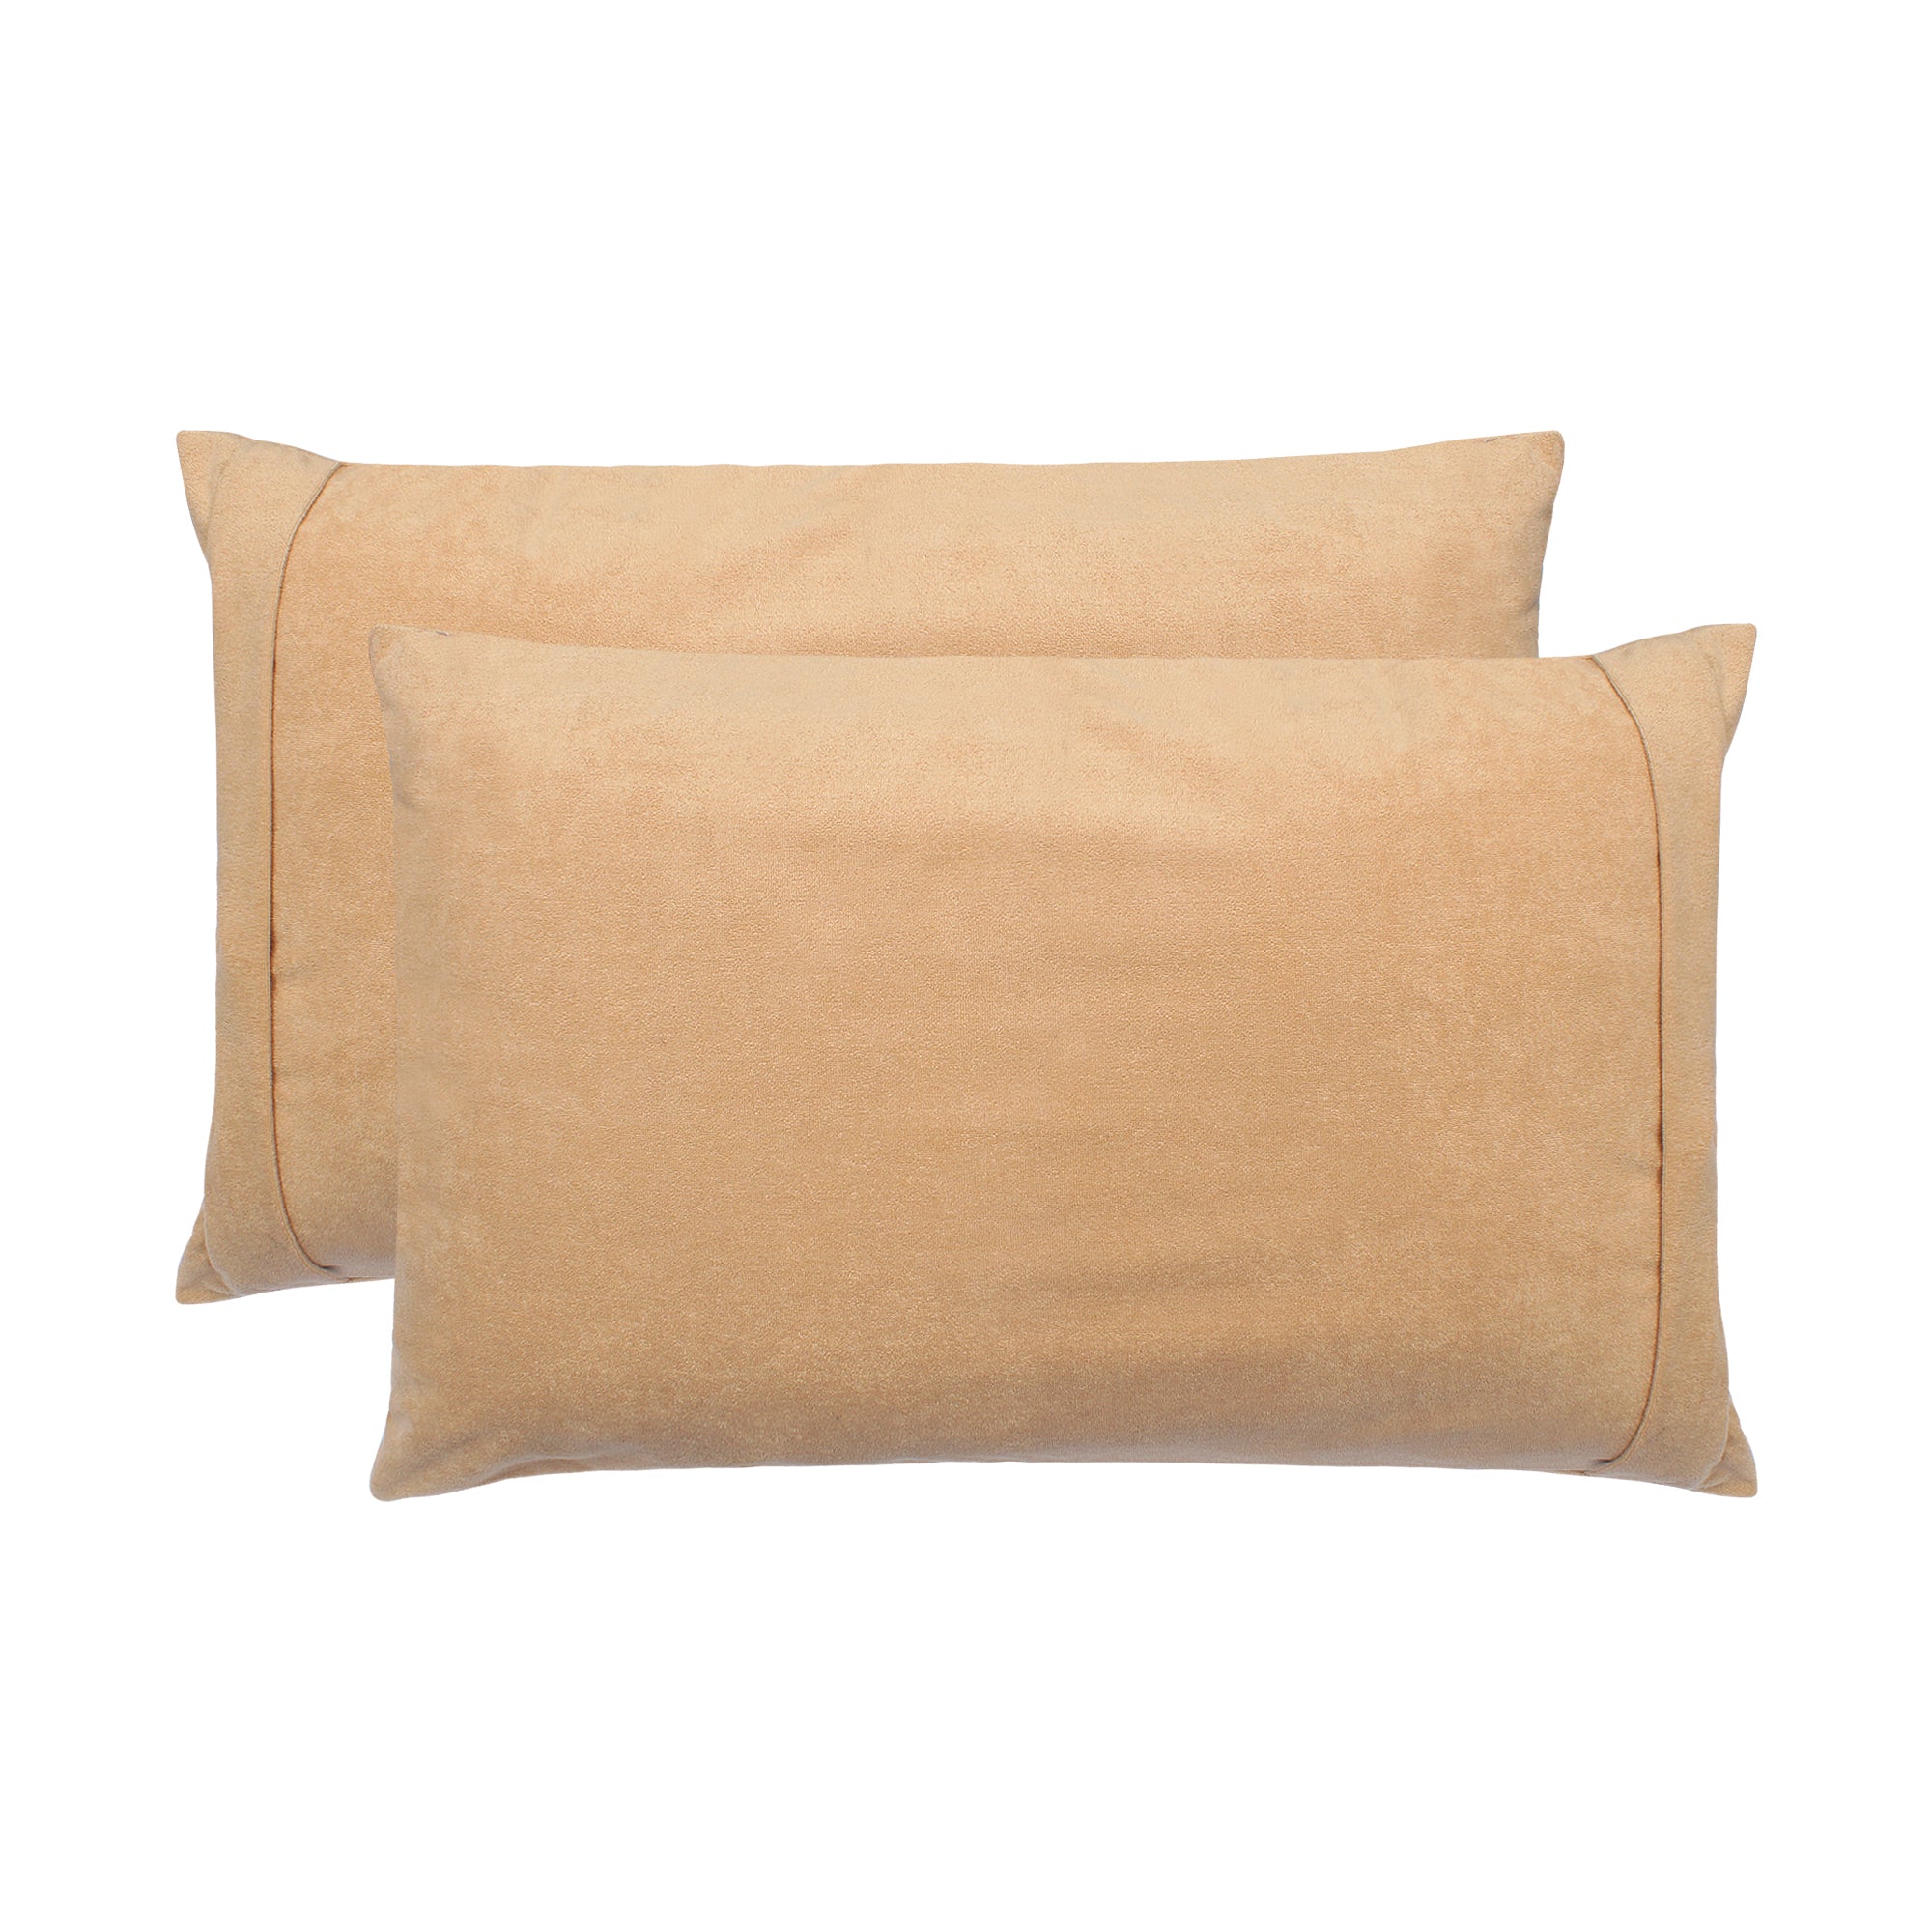 Waterproof Pillow Protector, Set Of 2 Pcs (BEIGE) - Dream Care Furnishings Private Limited